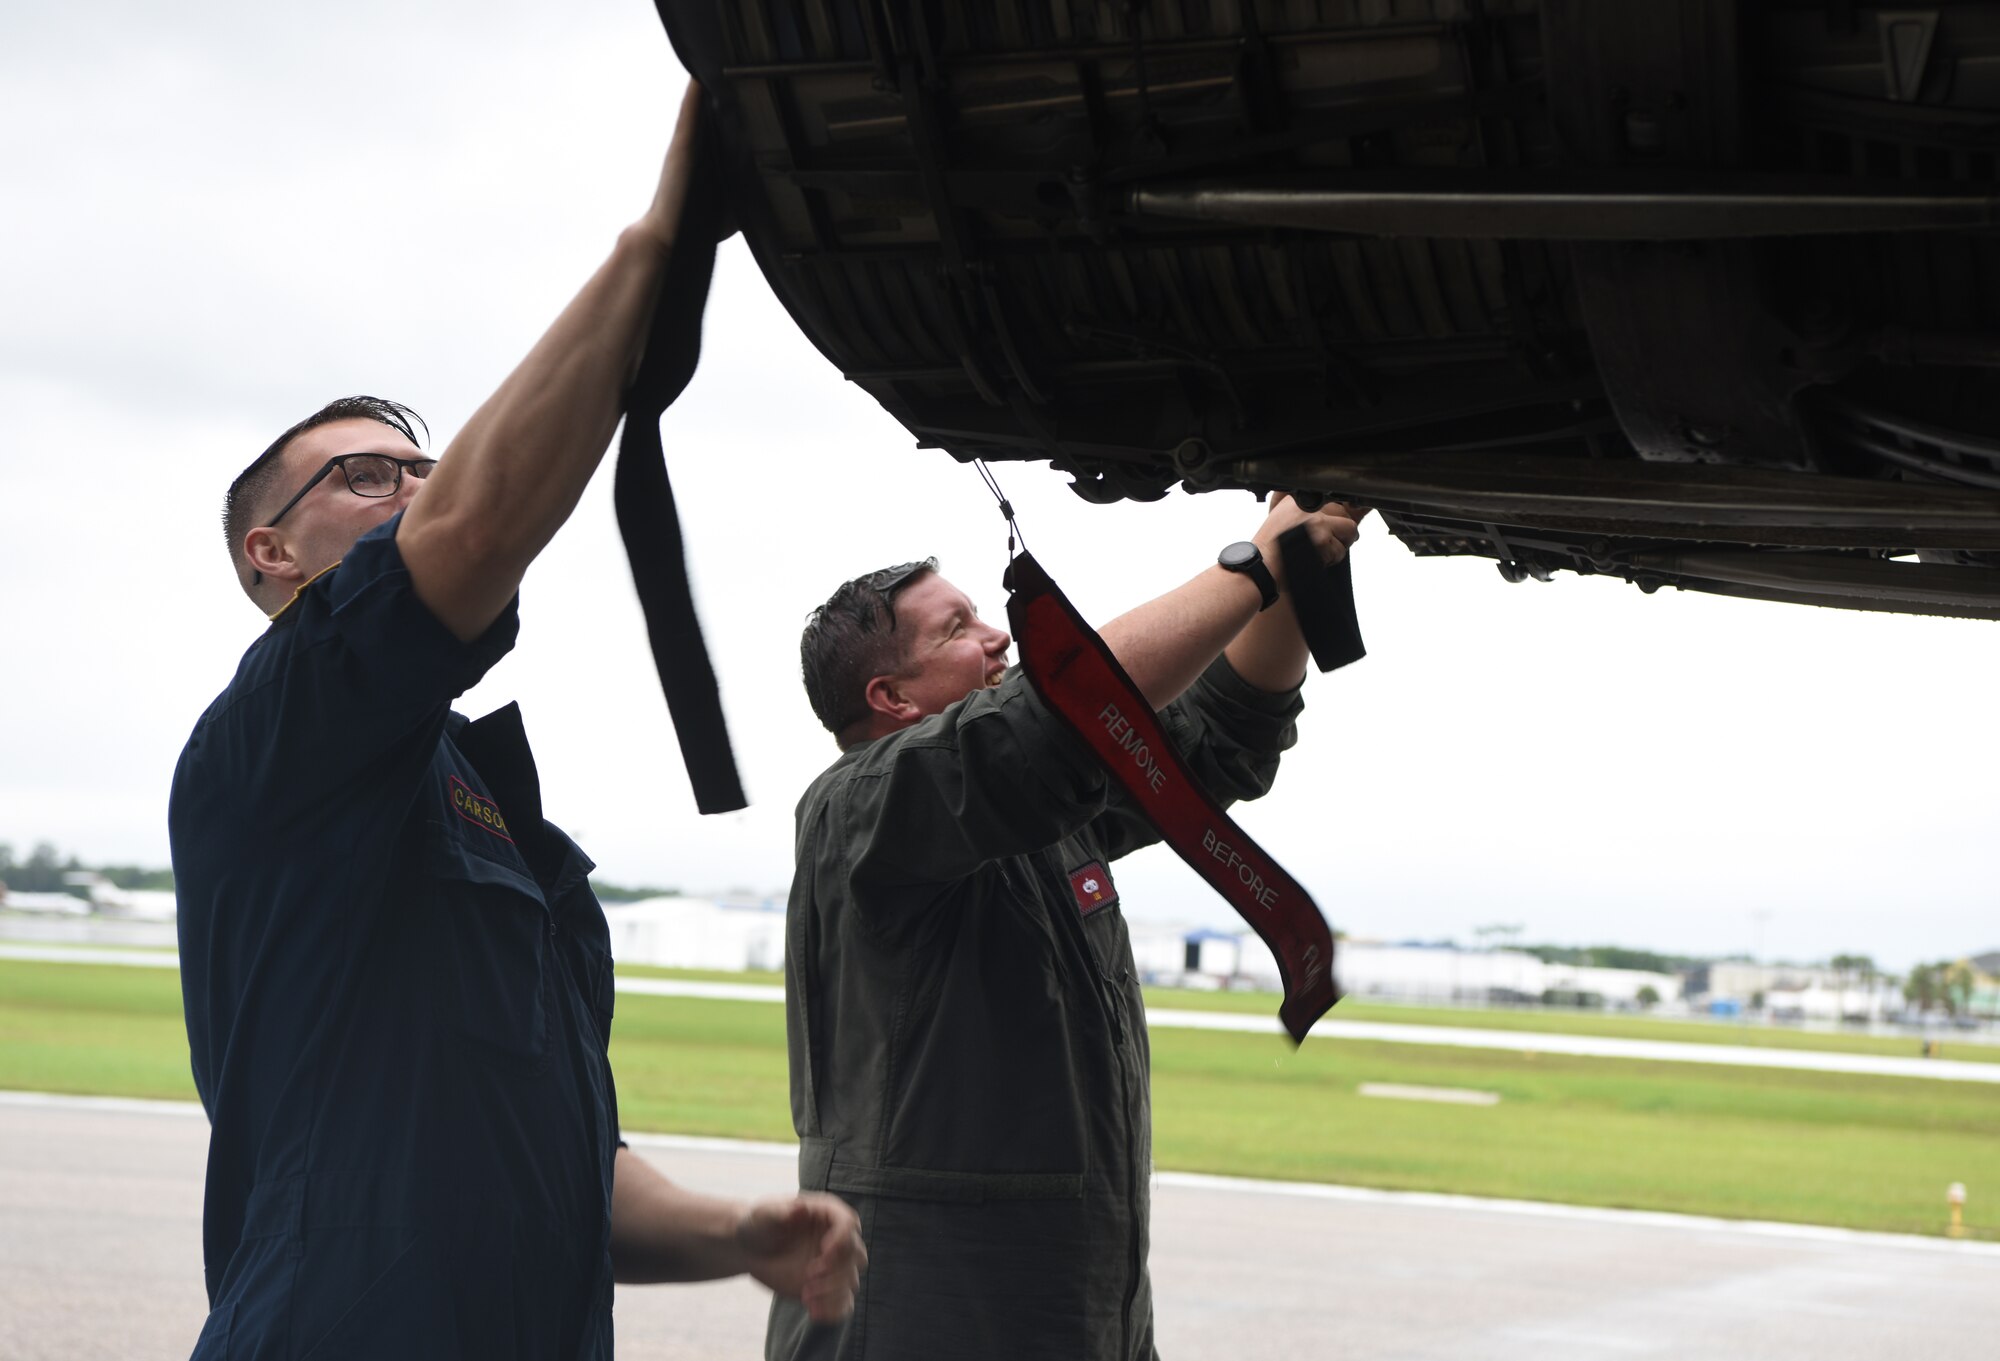 Members of the 337th Test and Evaluation Squadron speak to Sun ‘n Fun Aerospace Expo attendees at the Lakeland Linder International Airport in Lakeland, Florida, April 9, 2022. The expo started in 1974 as a fly-in for sport aviation enthusiasts and now has grown to one of the largest air shows in the world. As part of its anniversary, the expo highlighted the B-1B Lancer as one of its top static displays. (U.S. Air Force photo by Staff Sgt. Holly Cook)